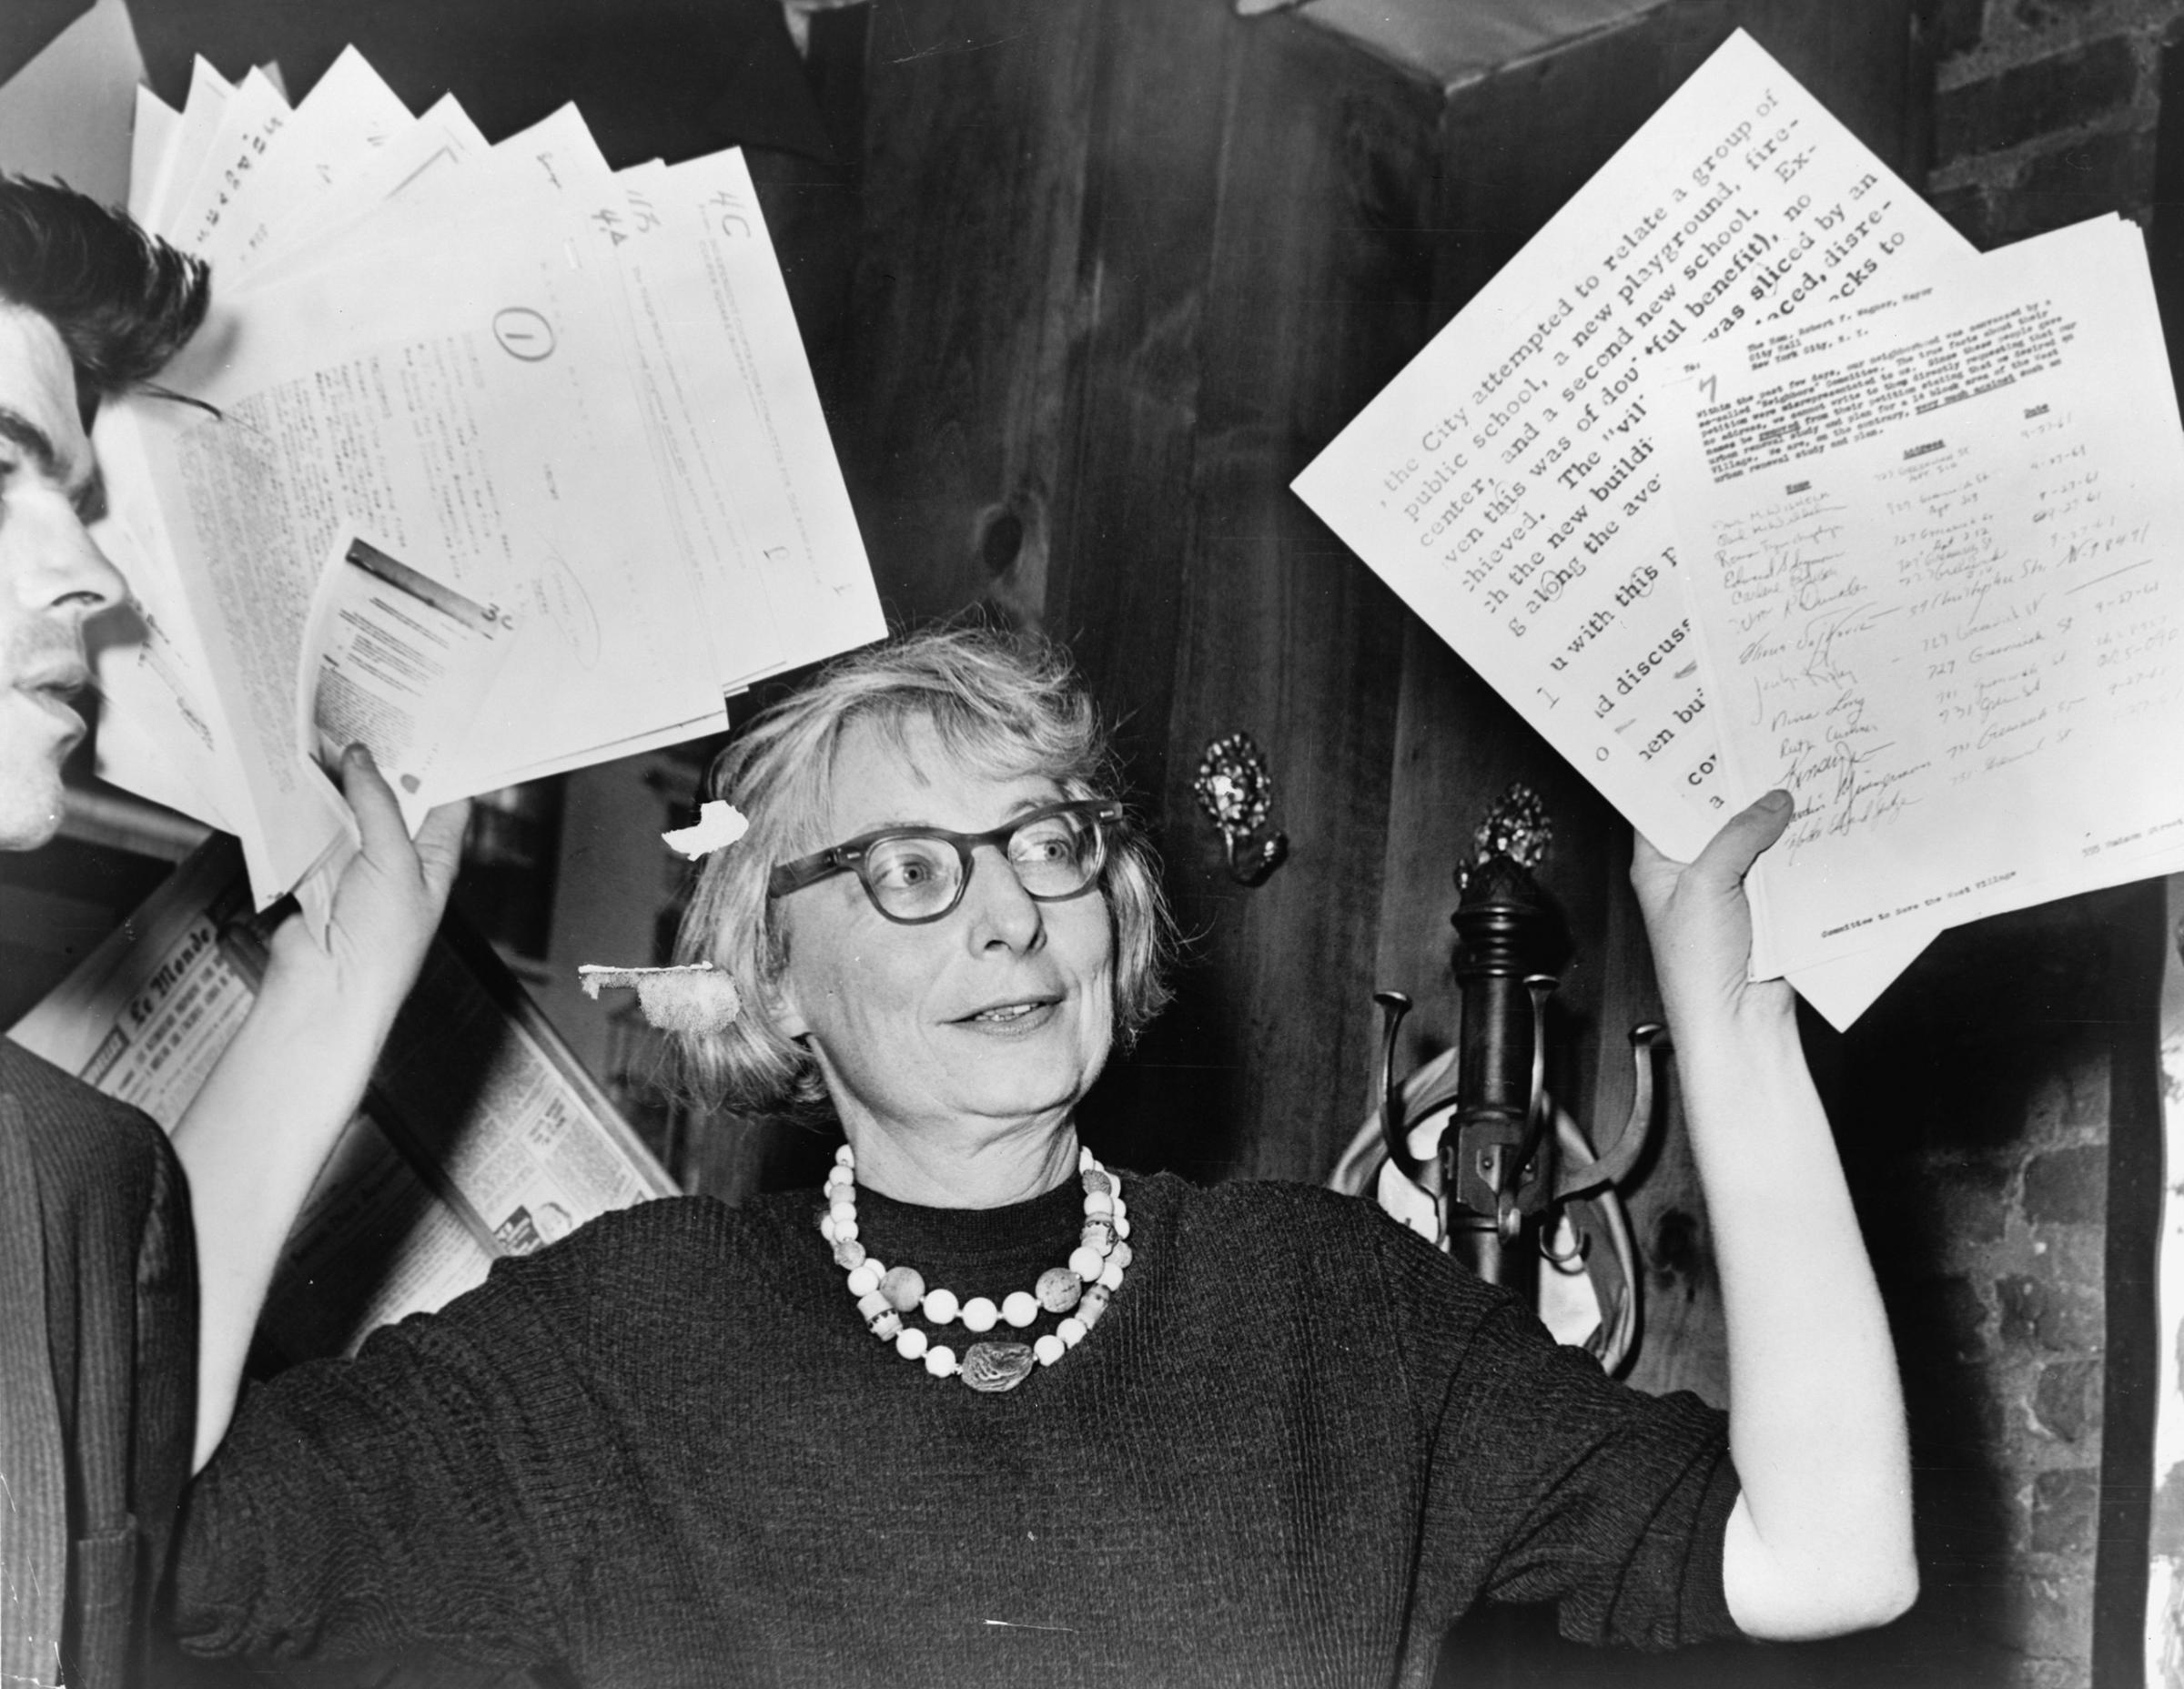 Mrs. Jane Jacobs, chairman of the Comm. to save the West Village holds up documentary evidence at press conference at Lions Head Restaurant at Hudson & Charles Sts